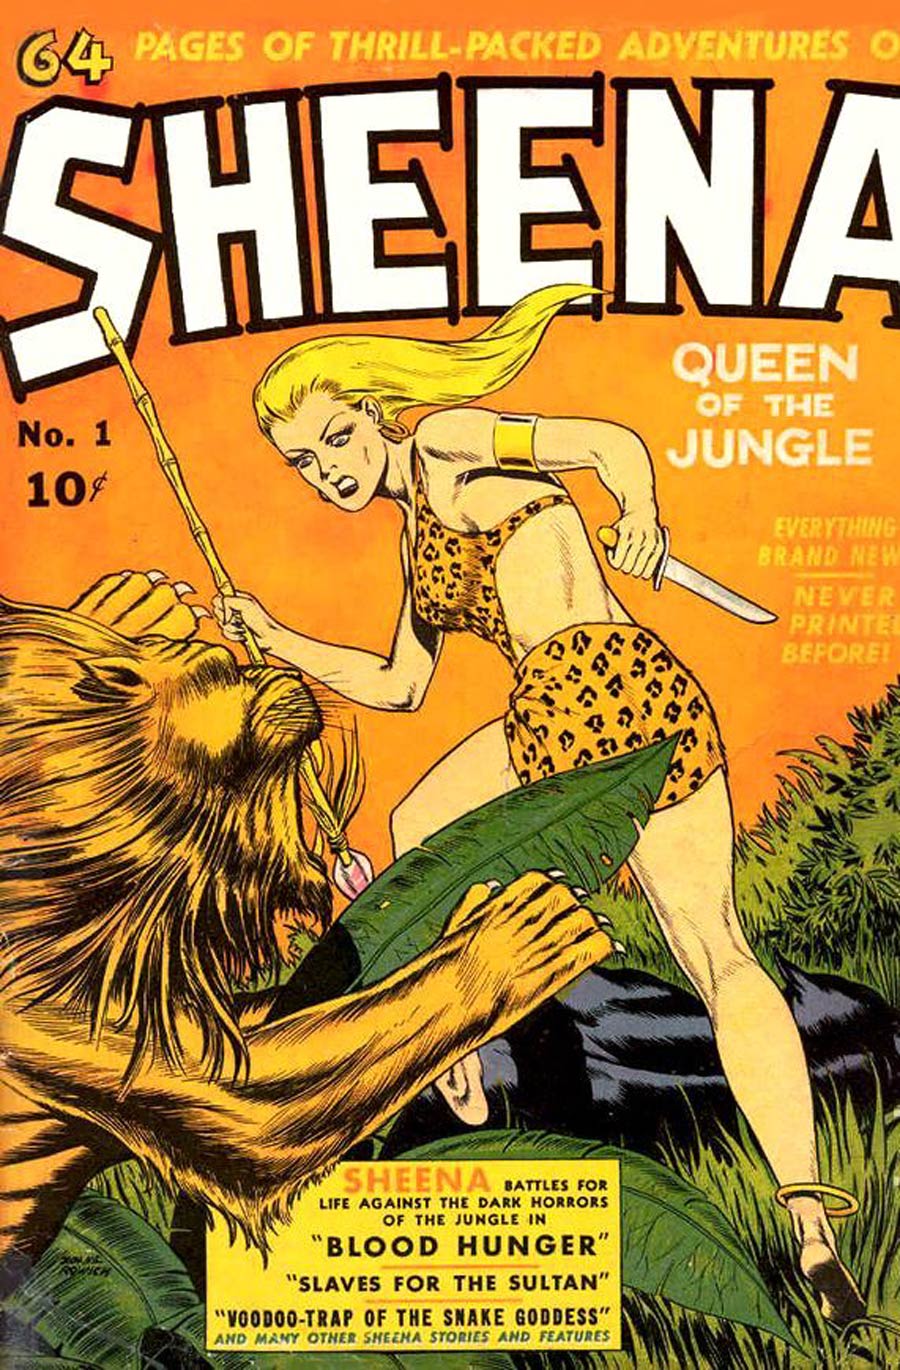 Sheena Queen Of The Jungle (Fiction House) #1